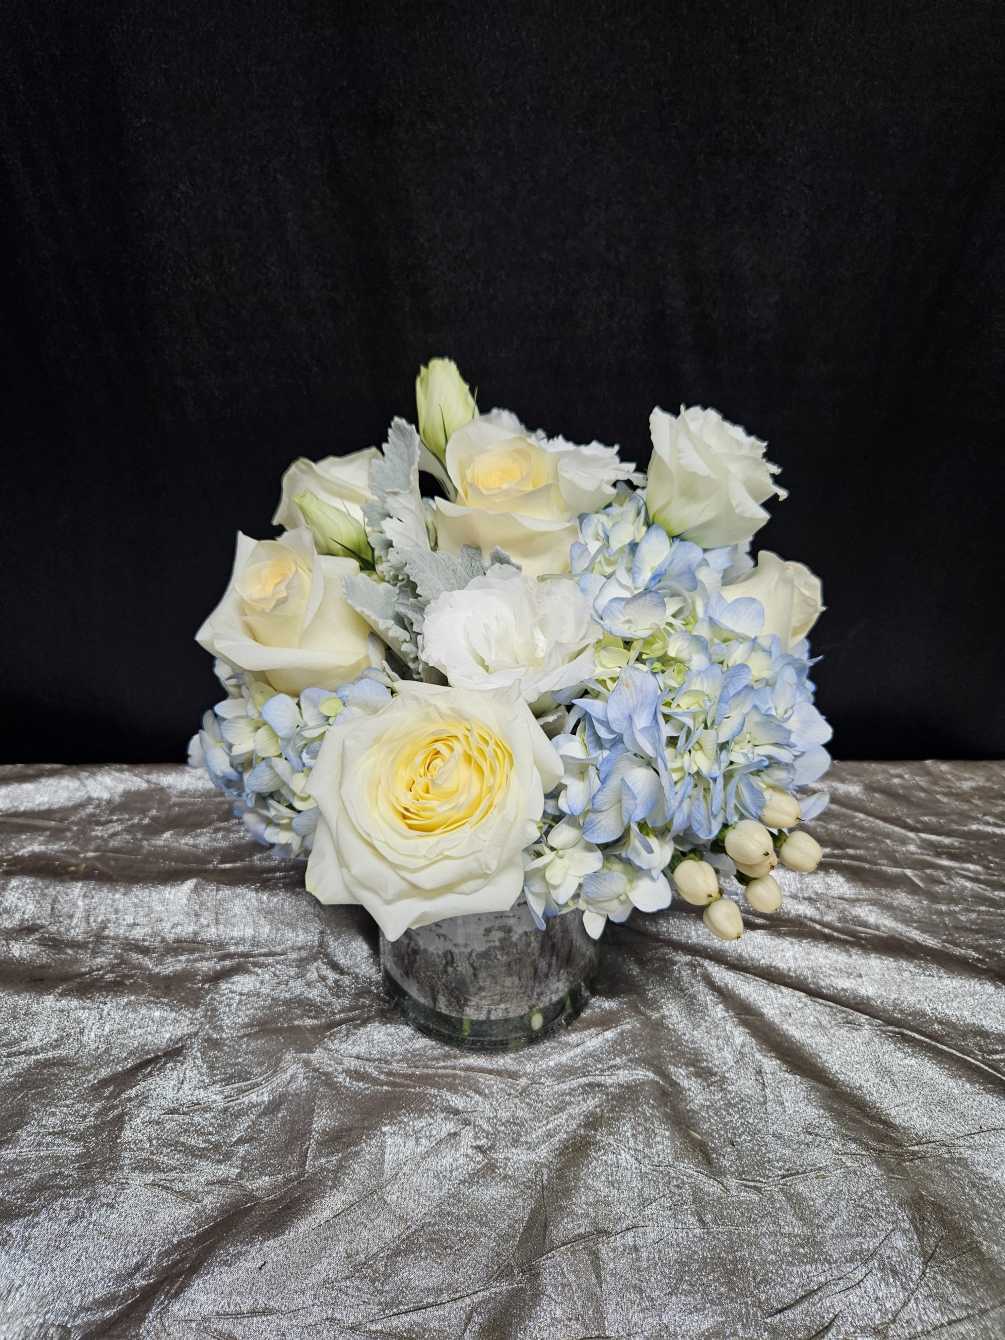 a clean arrangement utilizing blue hydrangeas with white flowers.
perfect for any occasion.